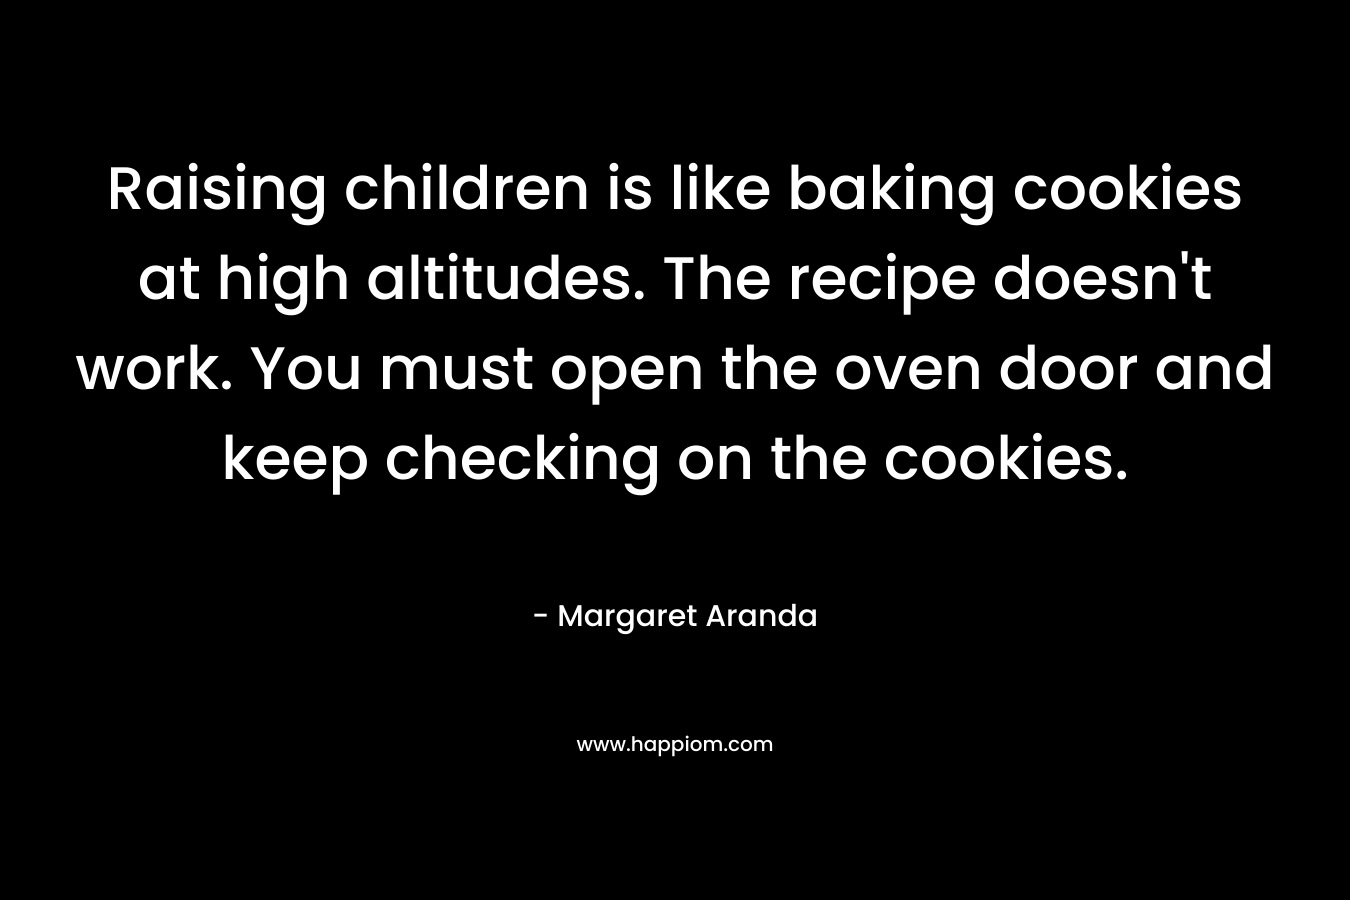 Raising children is like baking cookies at high altitudes. The recipe doesn’t work. You must open the oven door and keep checking on the cookies. – Margaret Aranda